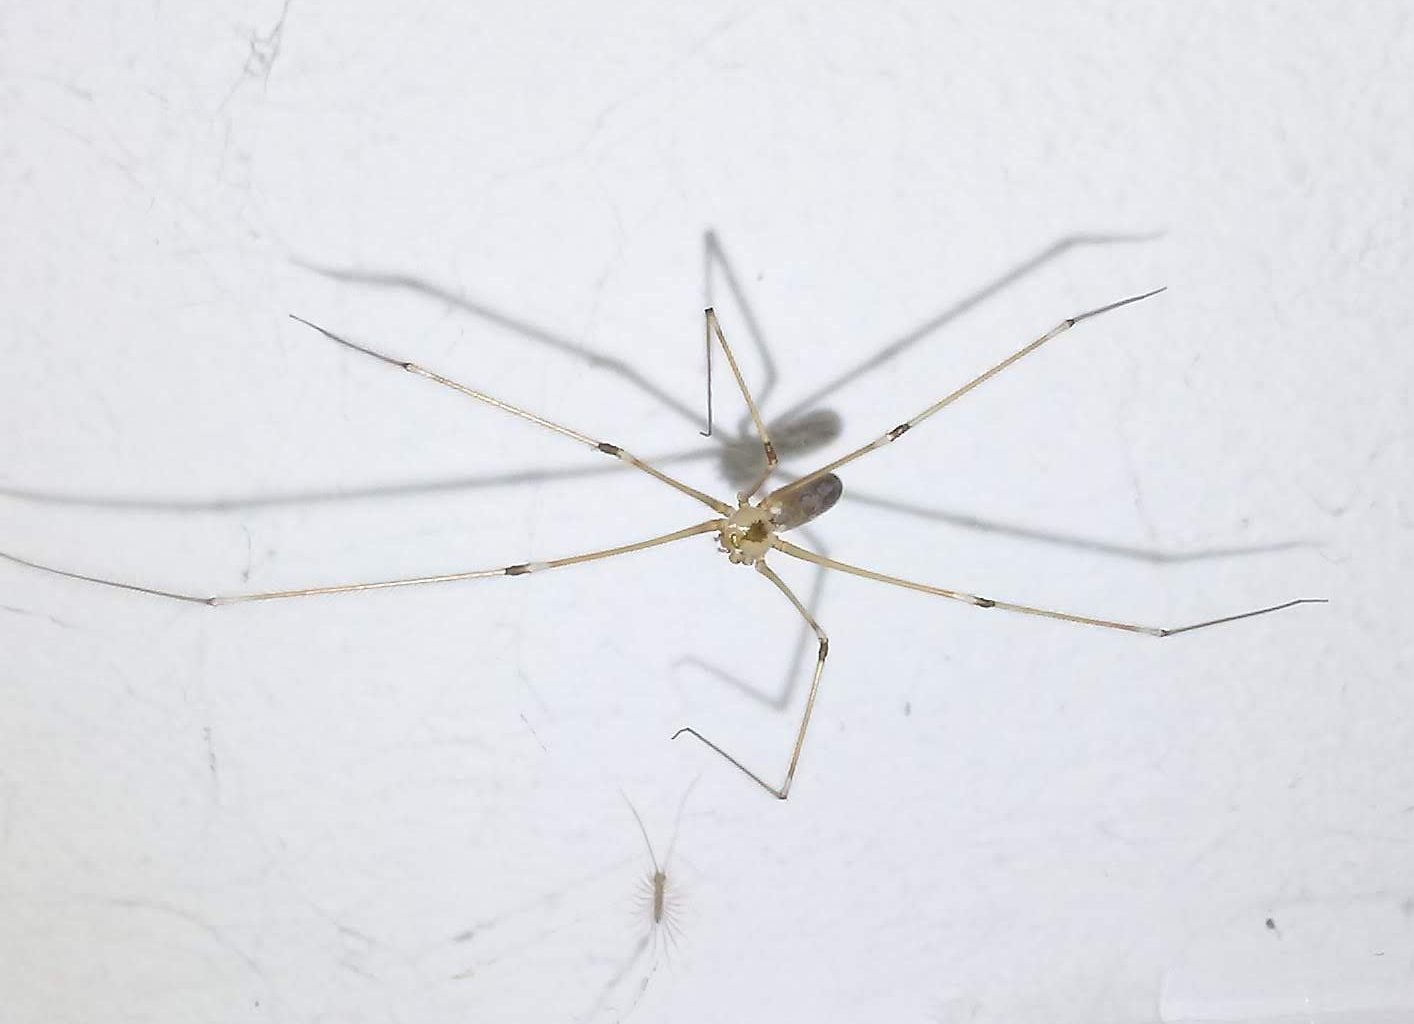 long bodied cellar spider reproduction